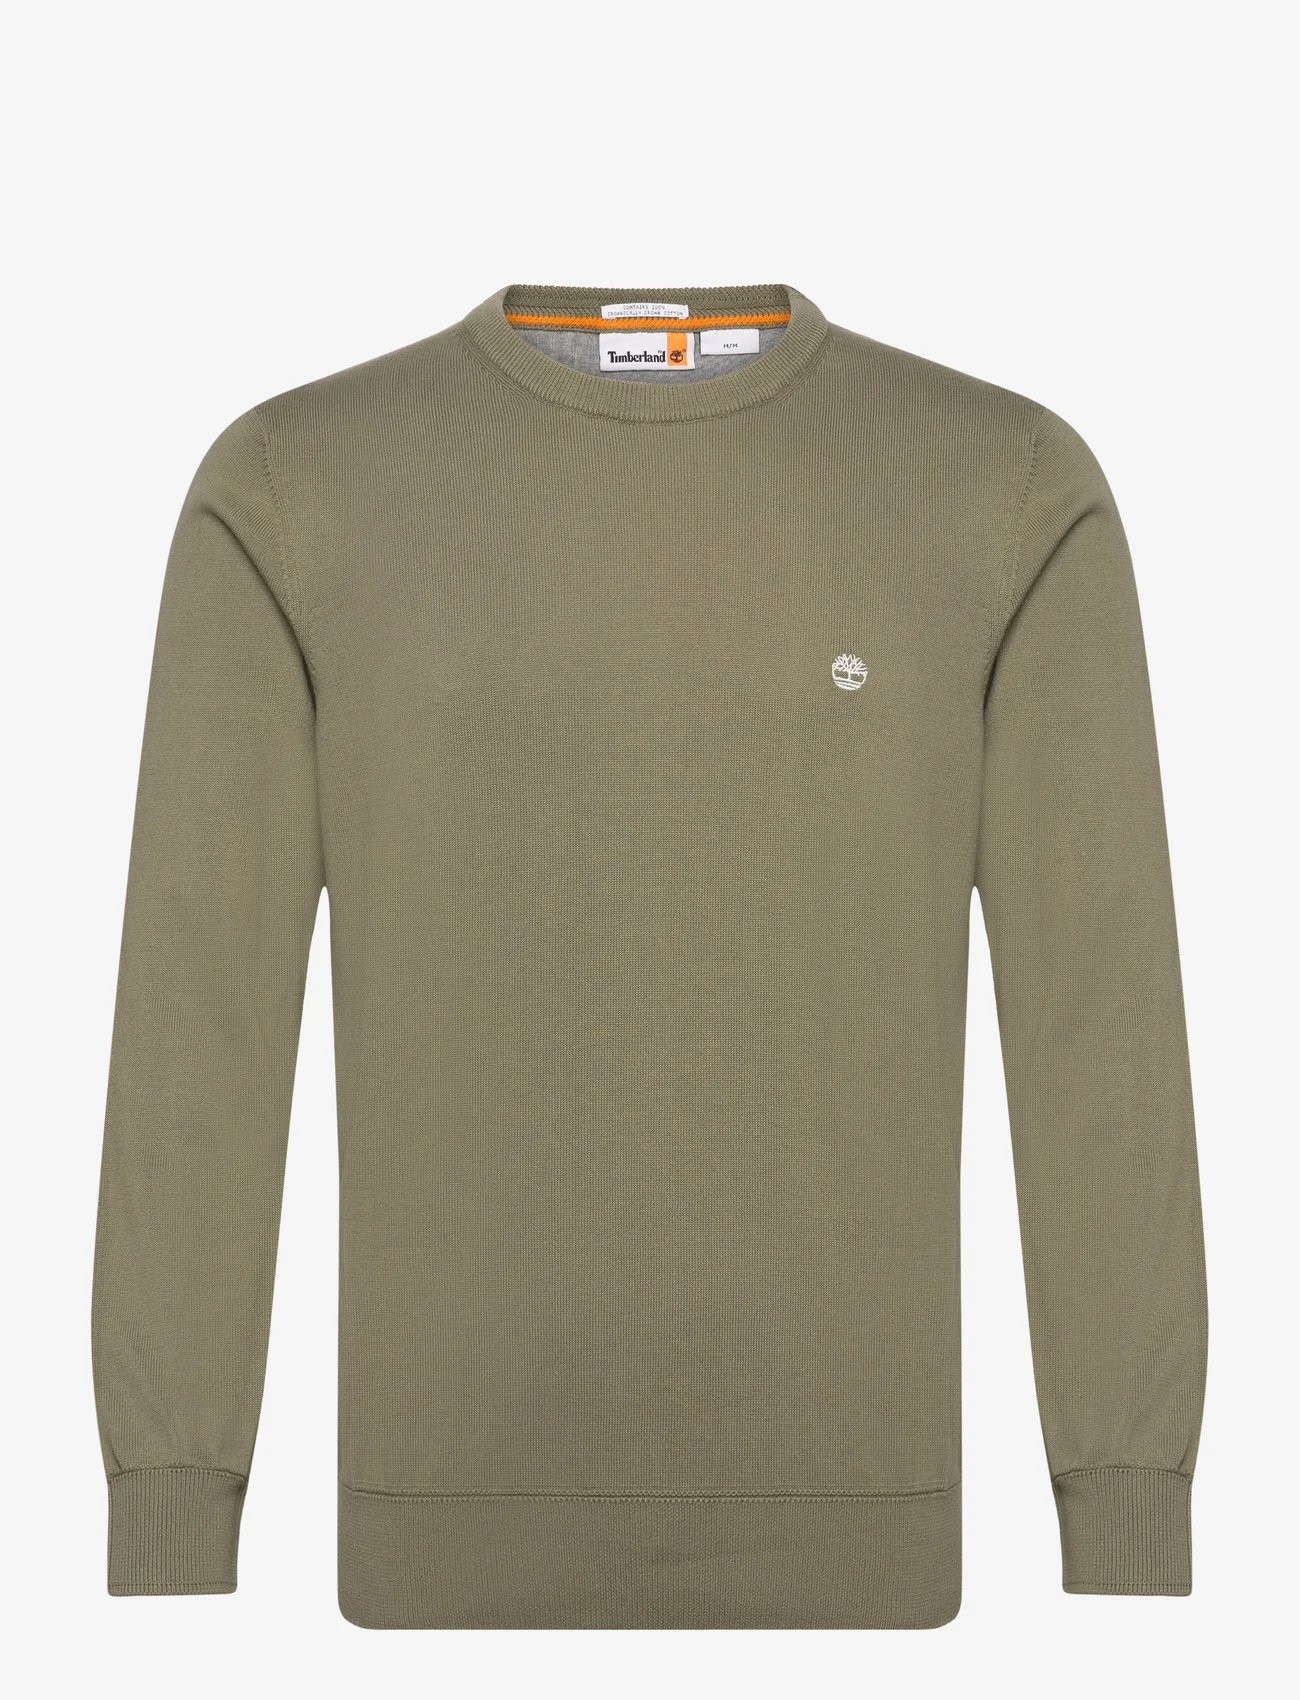 Timberland - WILLIAMS RIVER Cotton YD Sweater CASSEL EARTH - basic knitwear - cassel earth - 0